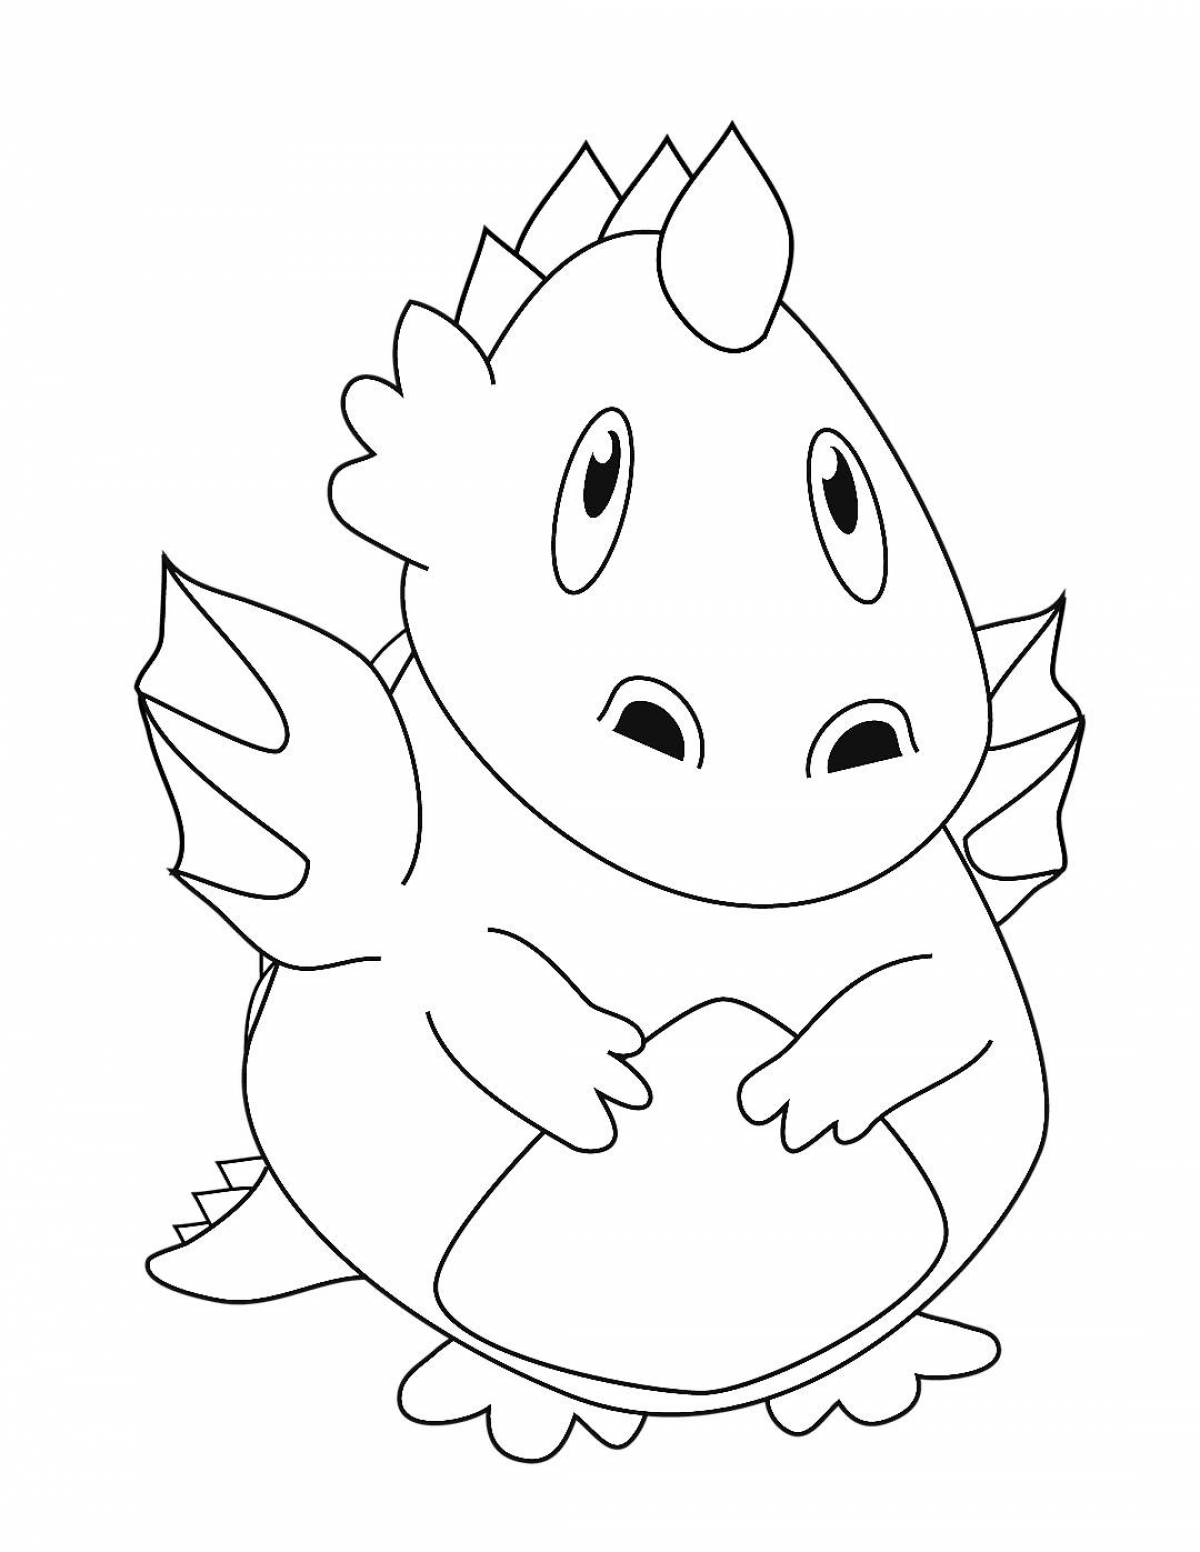 Scary dragon coloring book